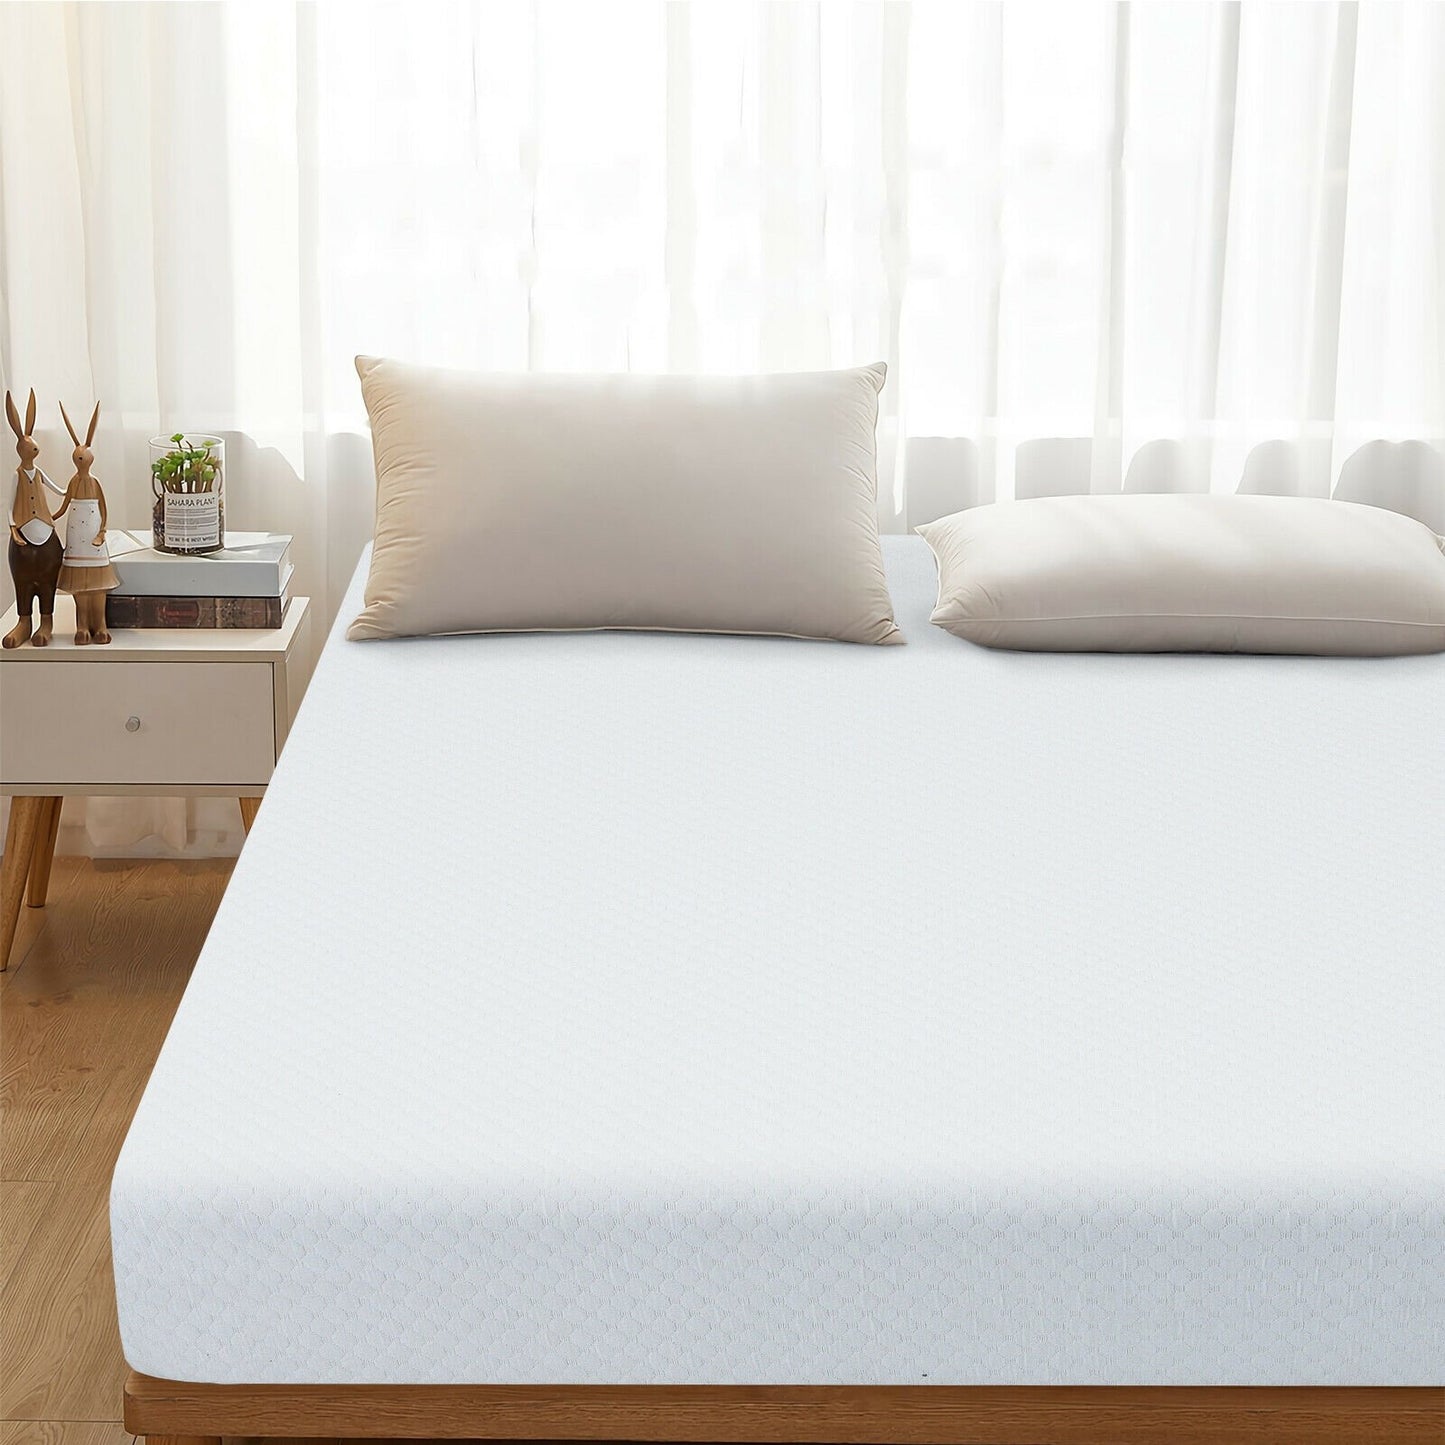 8 Inch Foam Medium Firm Mattress with Jacquard Cover-Queen Size, White